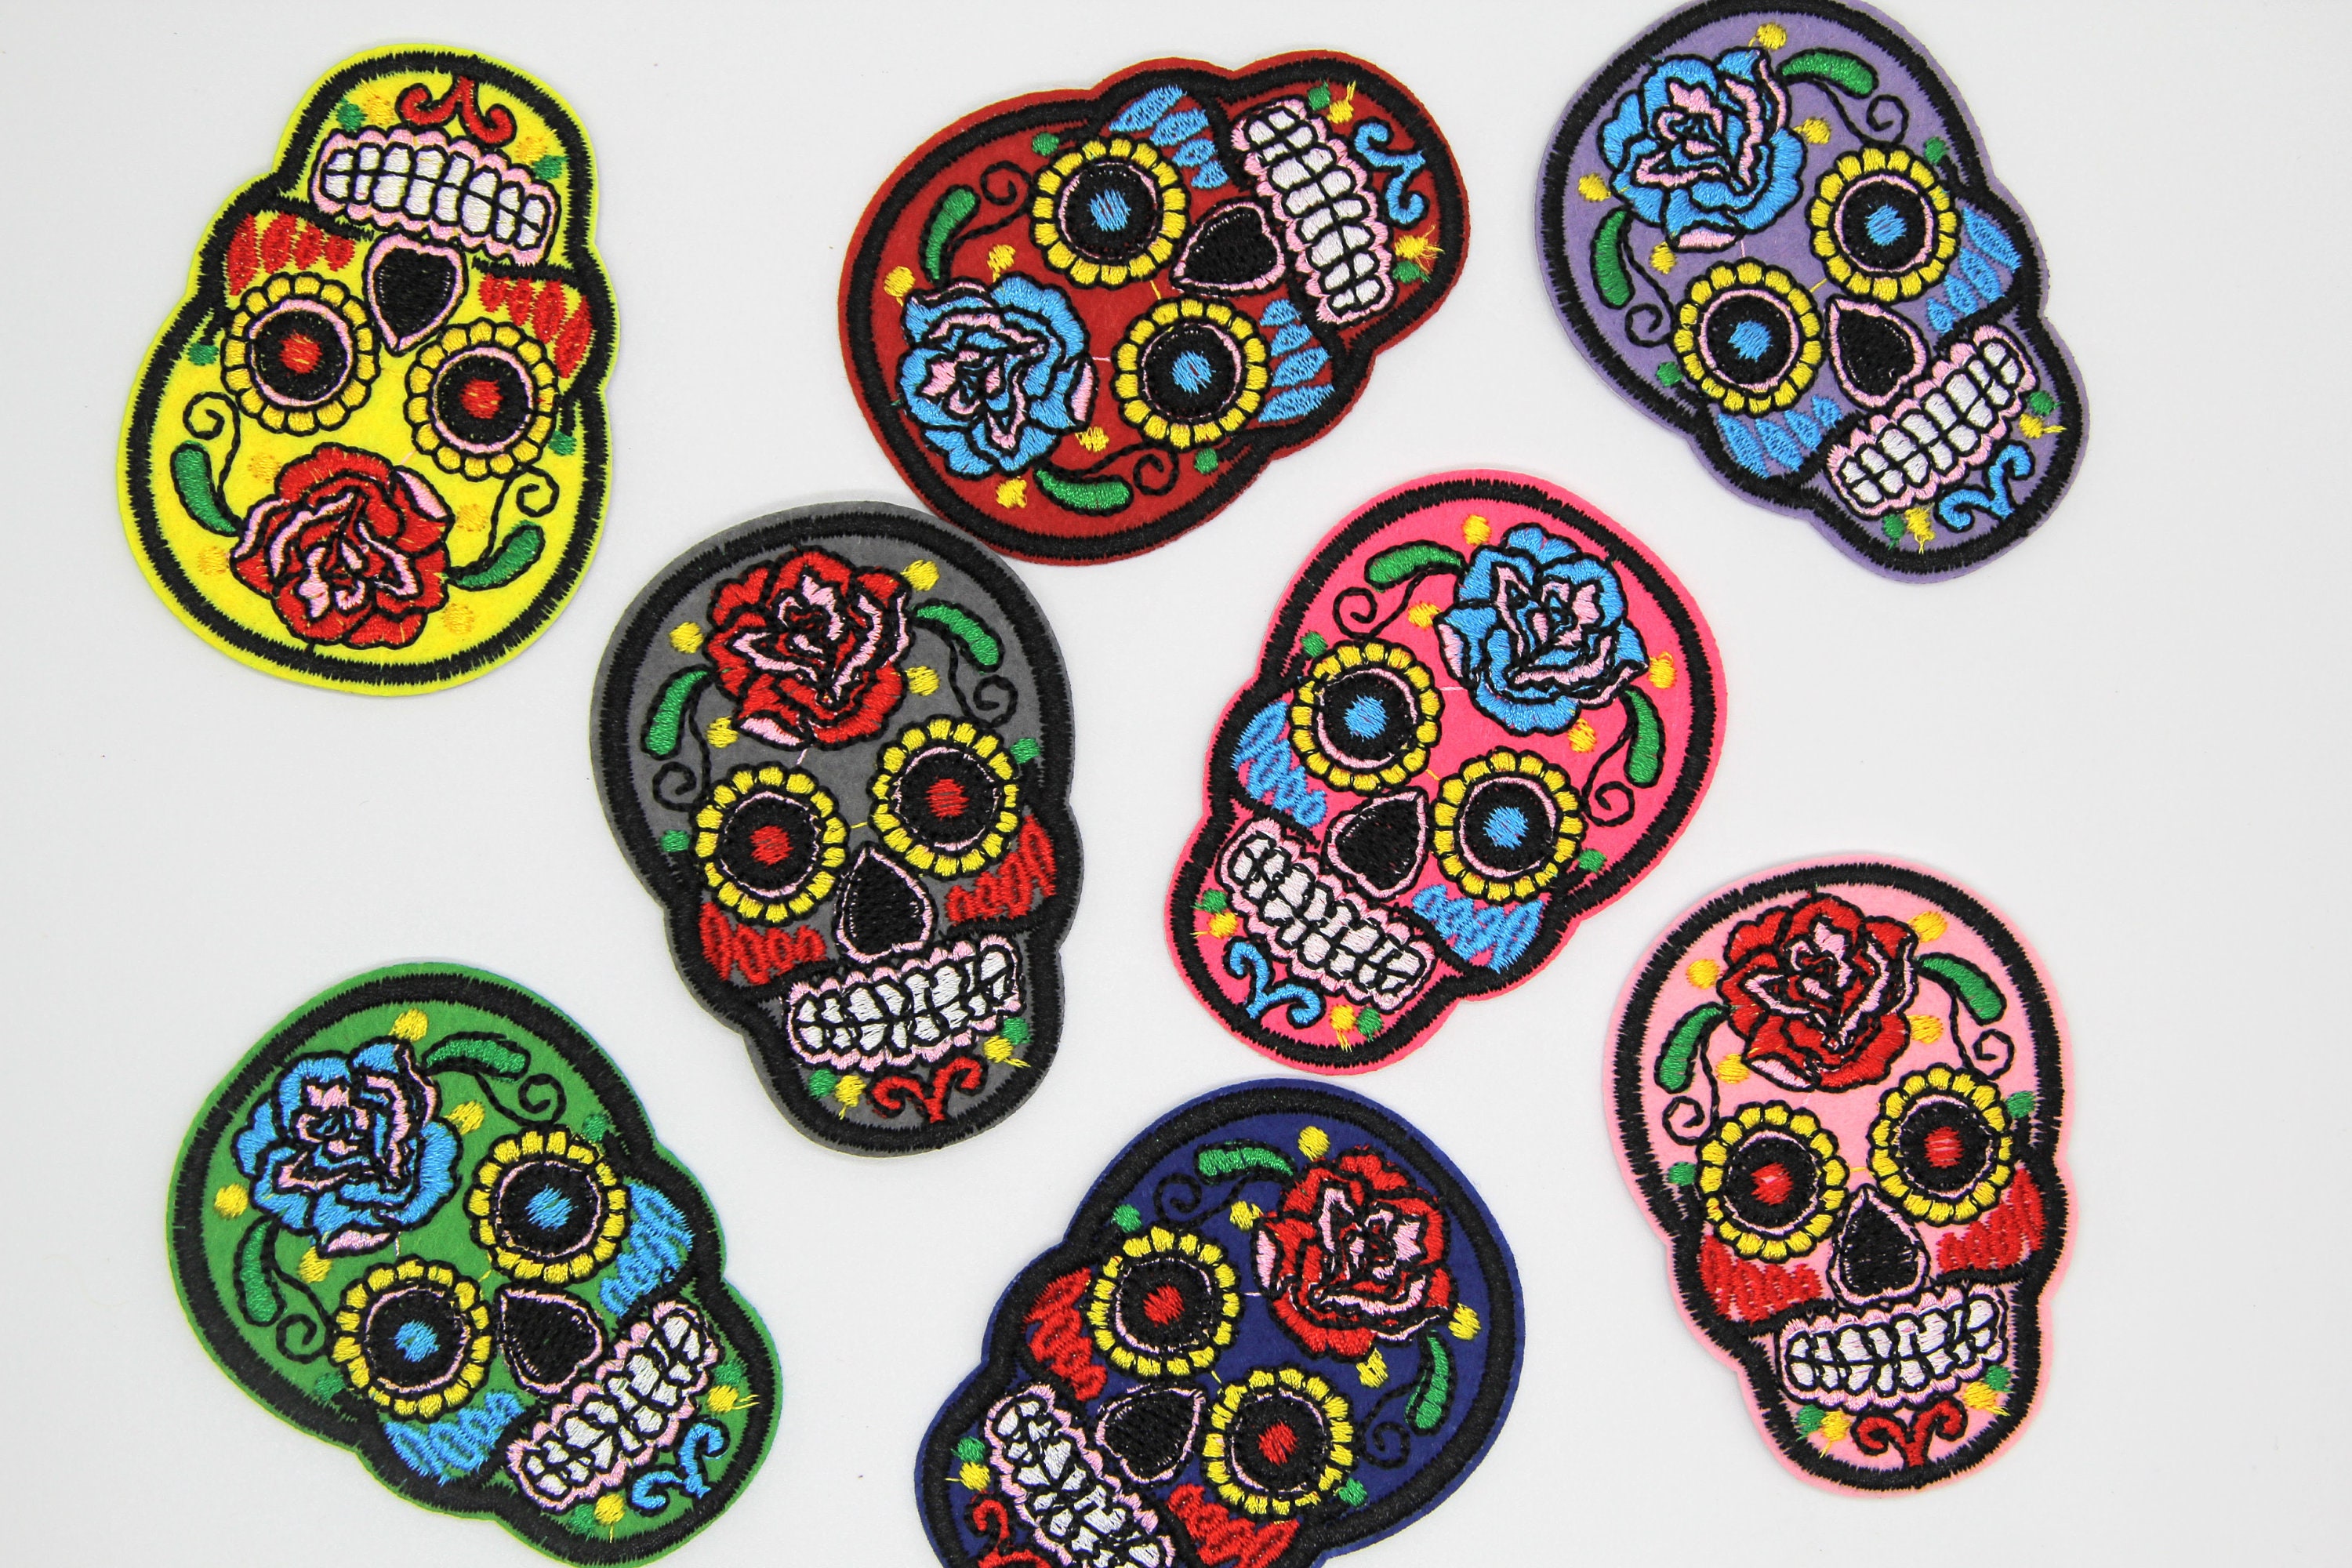 Skull Iron-on Patch Clothes Patches Embroidered Skull 